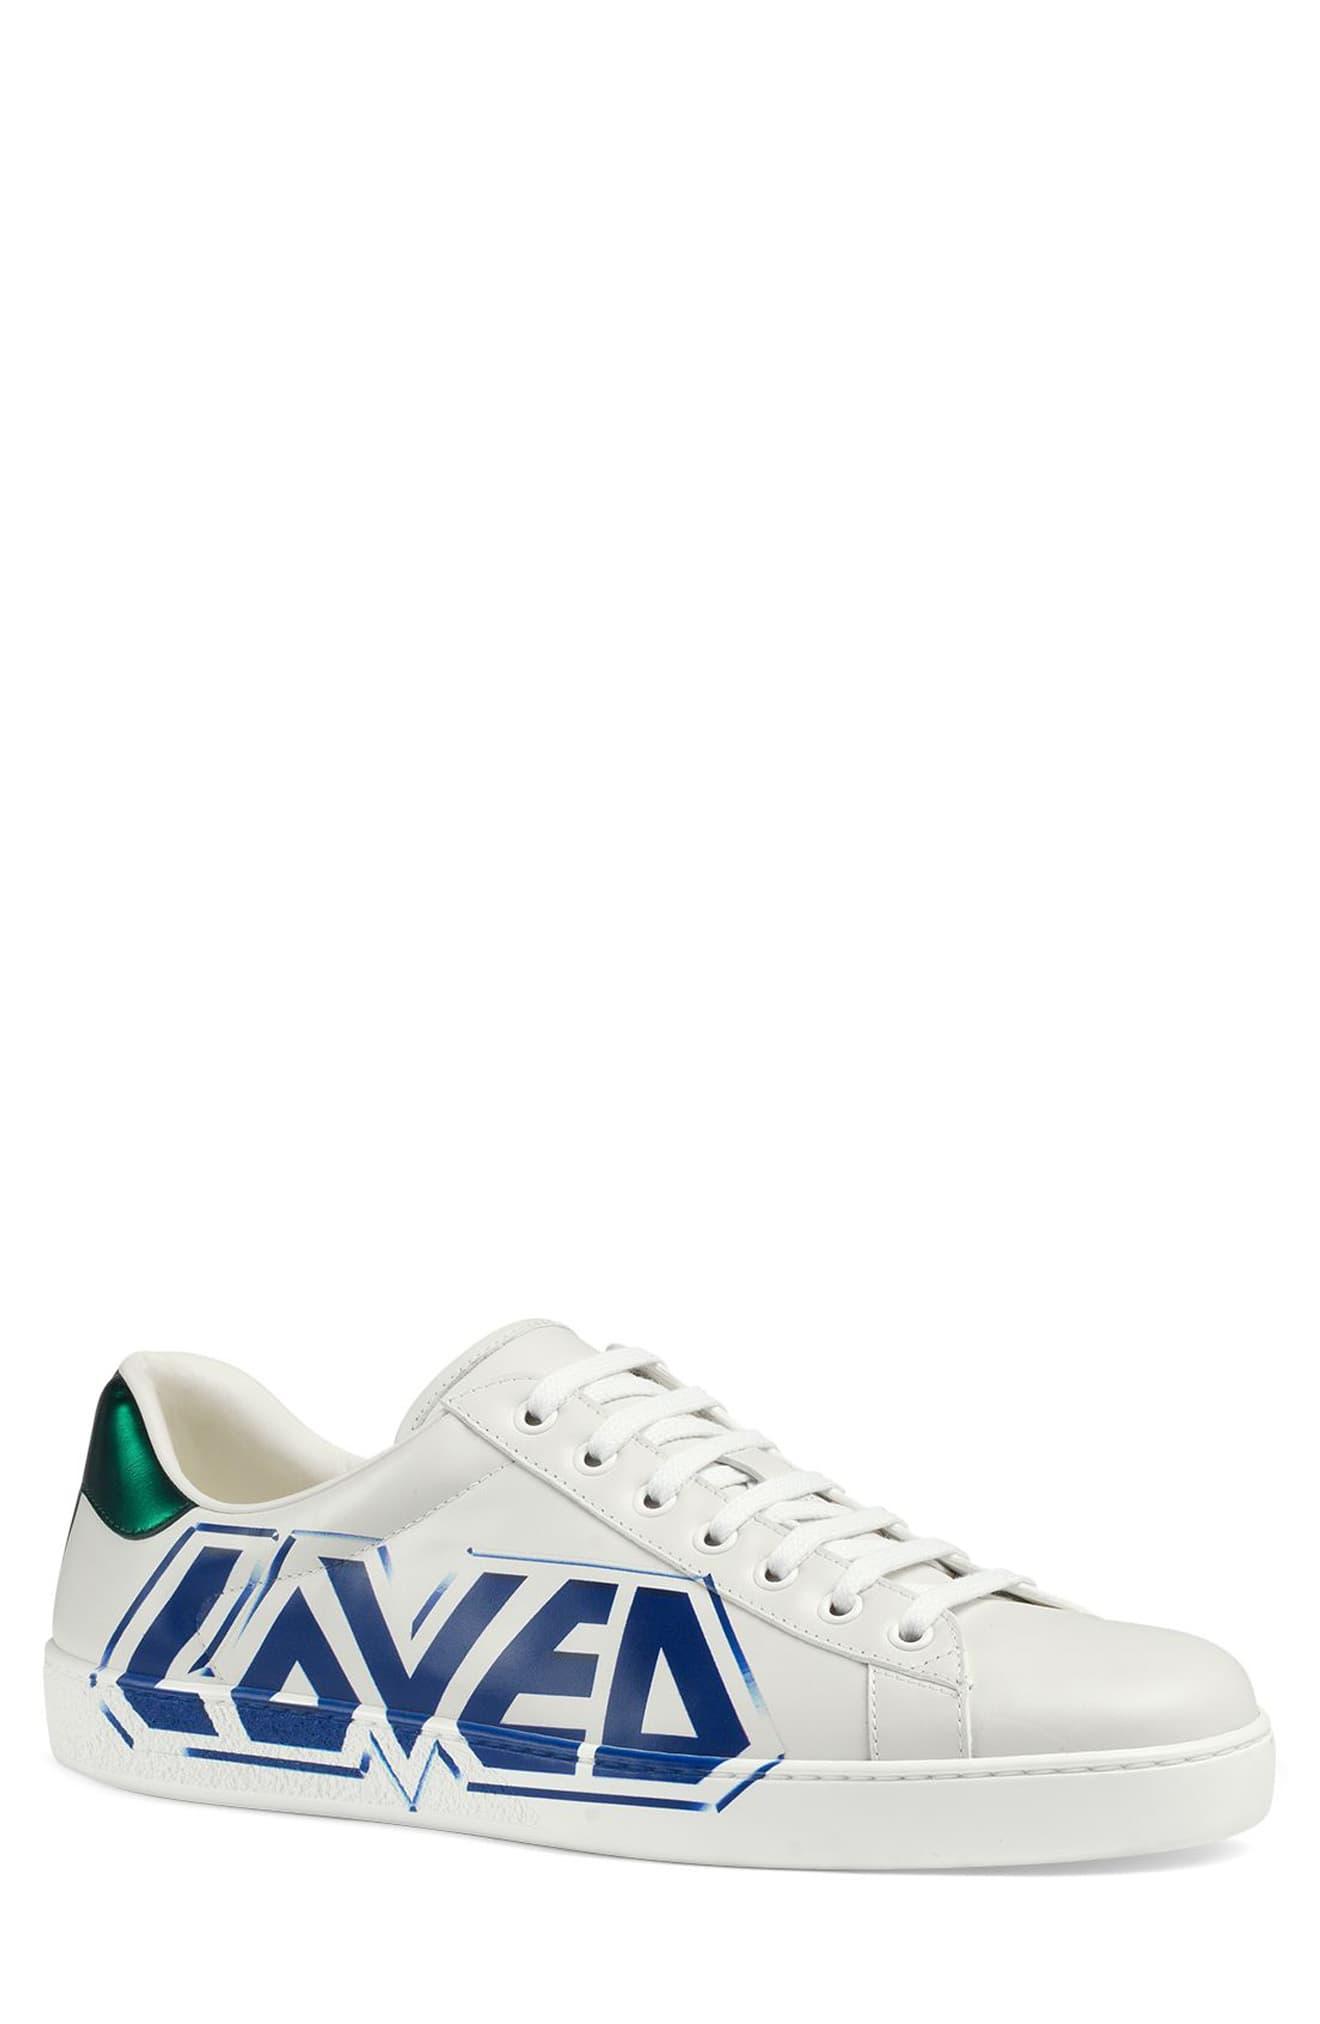 gucci new ace loved sneakers